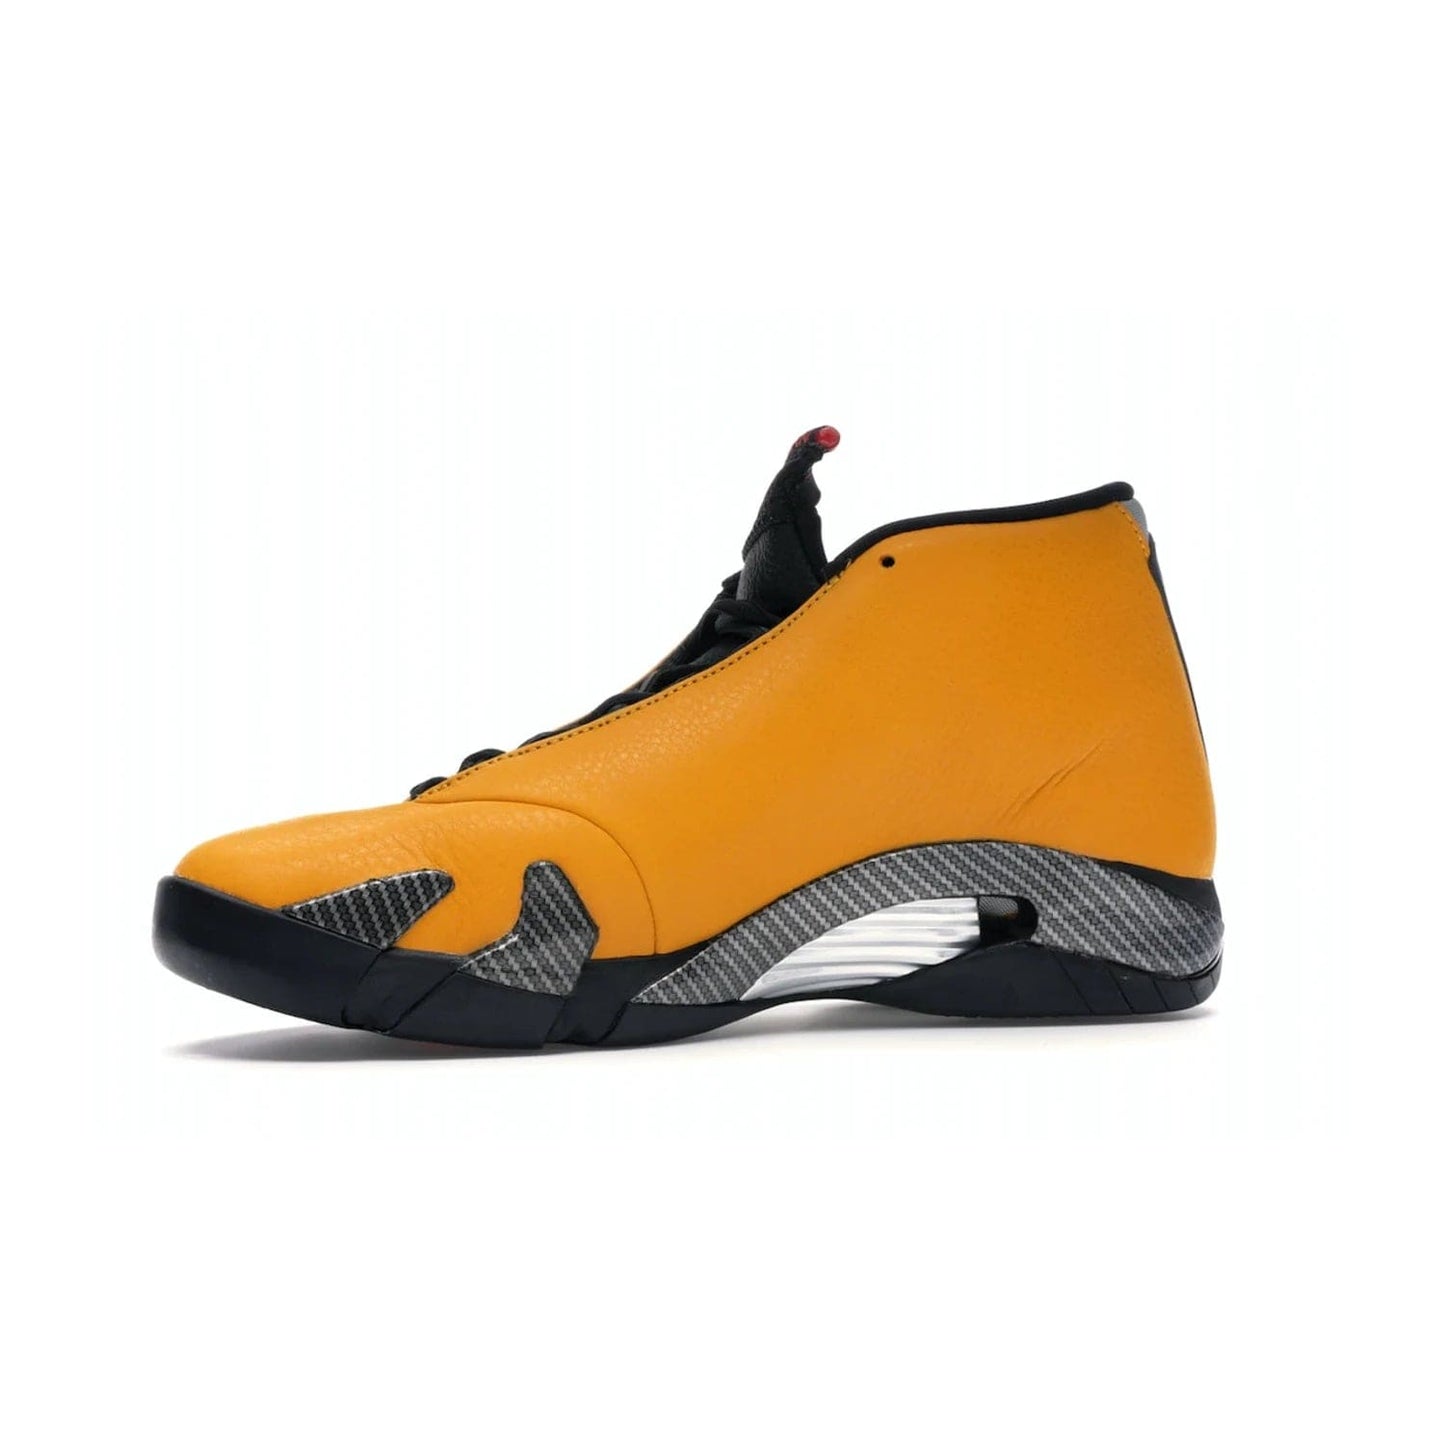 Jordan 14 Retro University Gold - Image 17 - Only at www.BallersClubKickz.com - Air Jordan 14 Retro University Gold: High-quality leather sneaker with Jumpman, tongue & heel logos. Zoom Air units & herringbone traction for superior comfort. University Gold outsole for stylish streetwear.